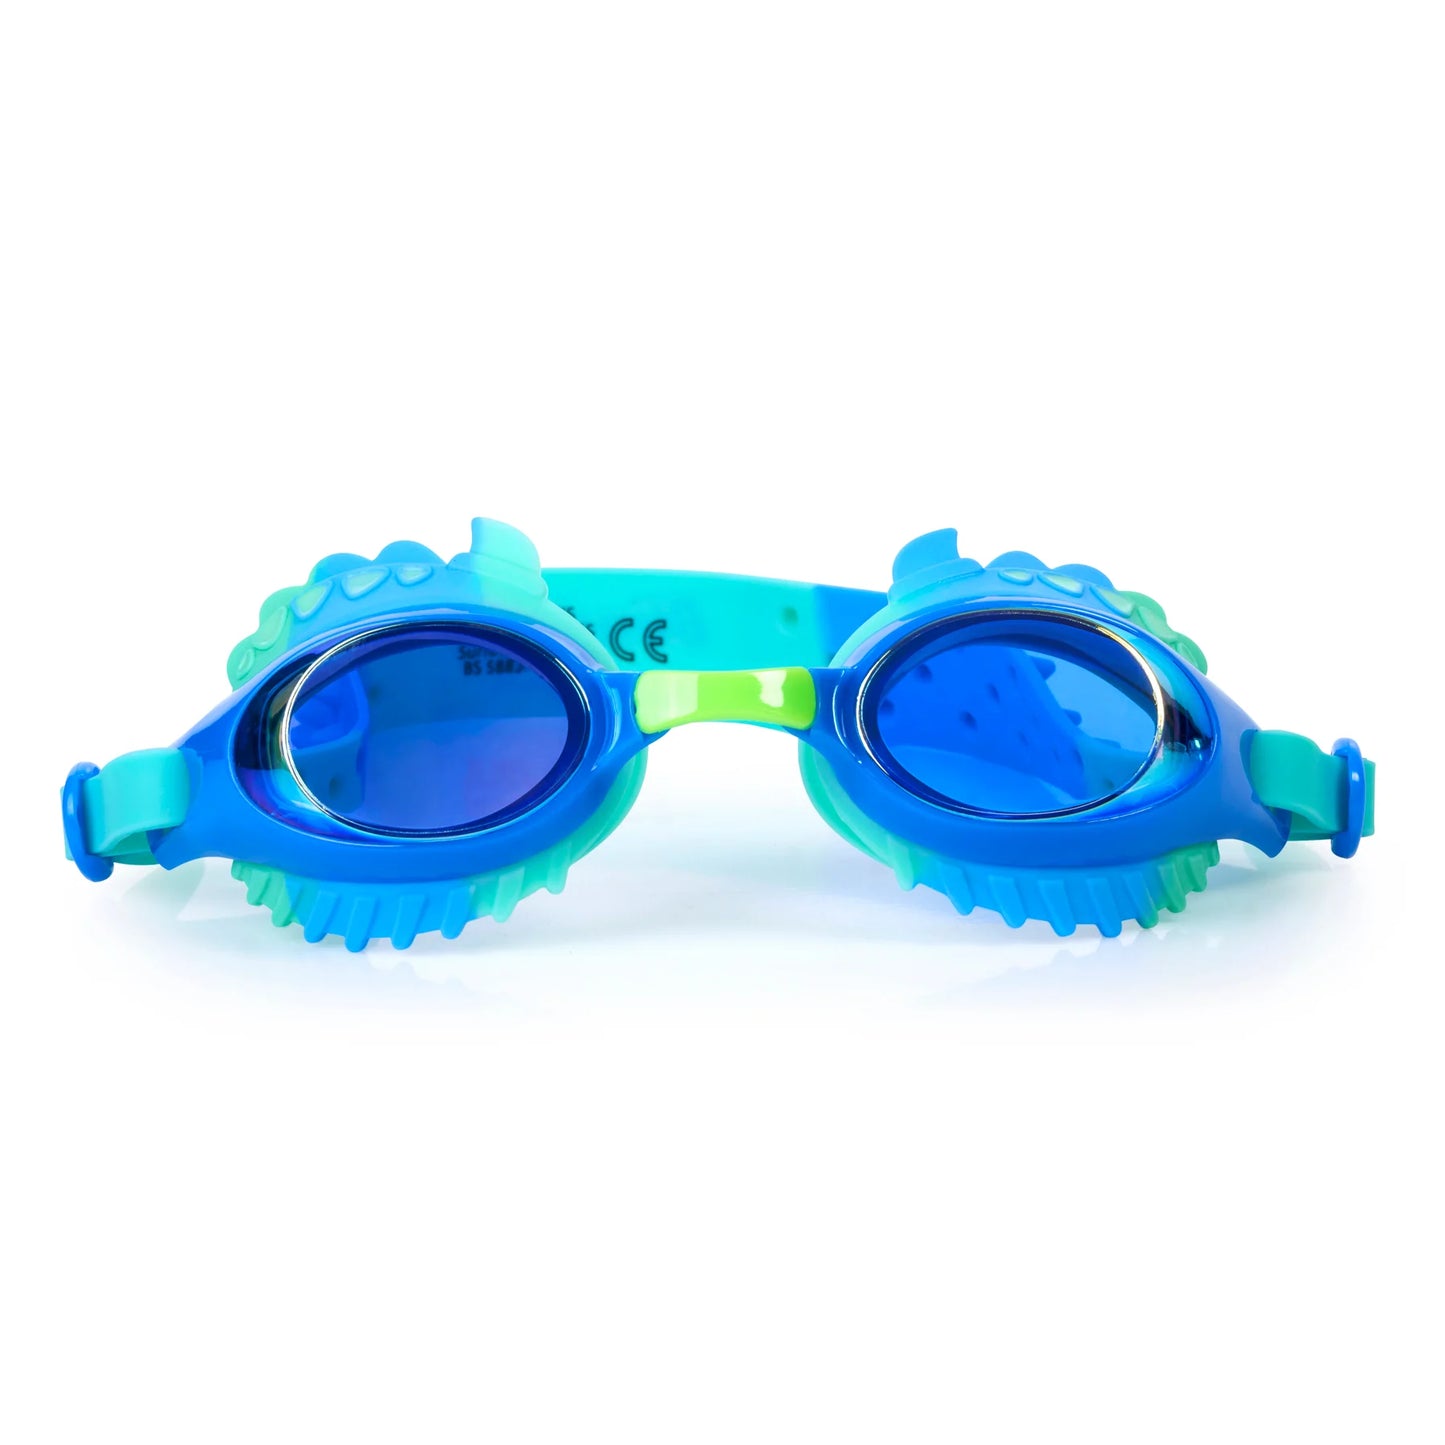 Bling2O Dylan the Dino Swim Goggles